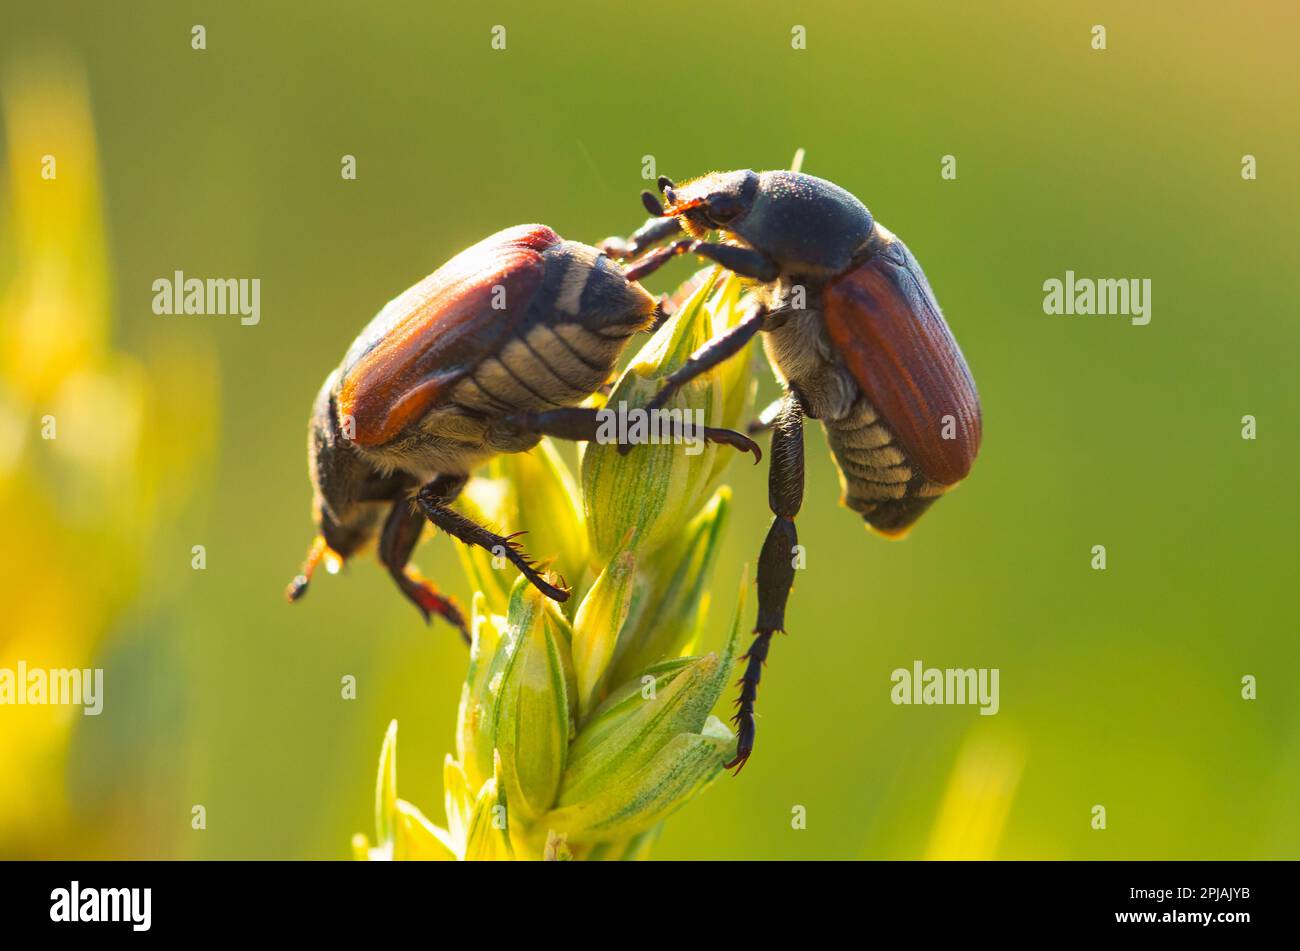 Sitophilus granarius is a common pest that causes damage to crops worldwide. This image illustrates the threat posed by the tiny insect to agricultura Stock Photo